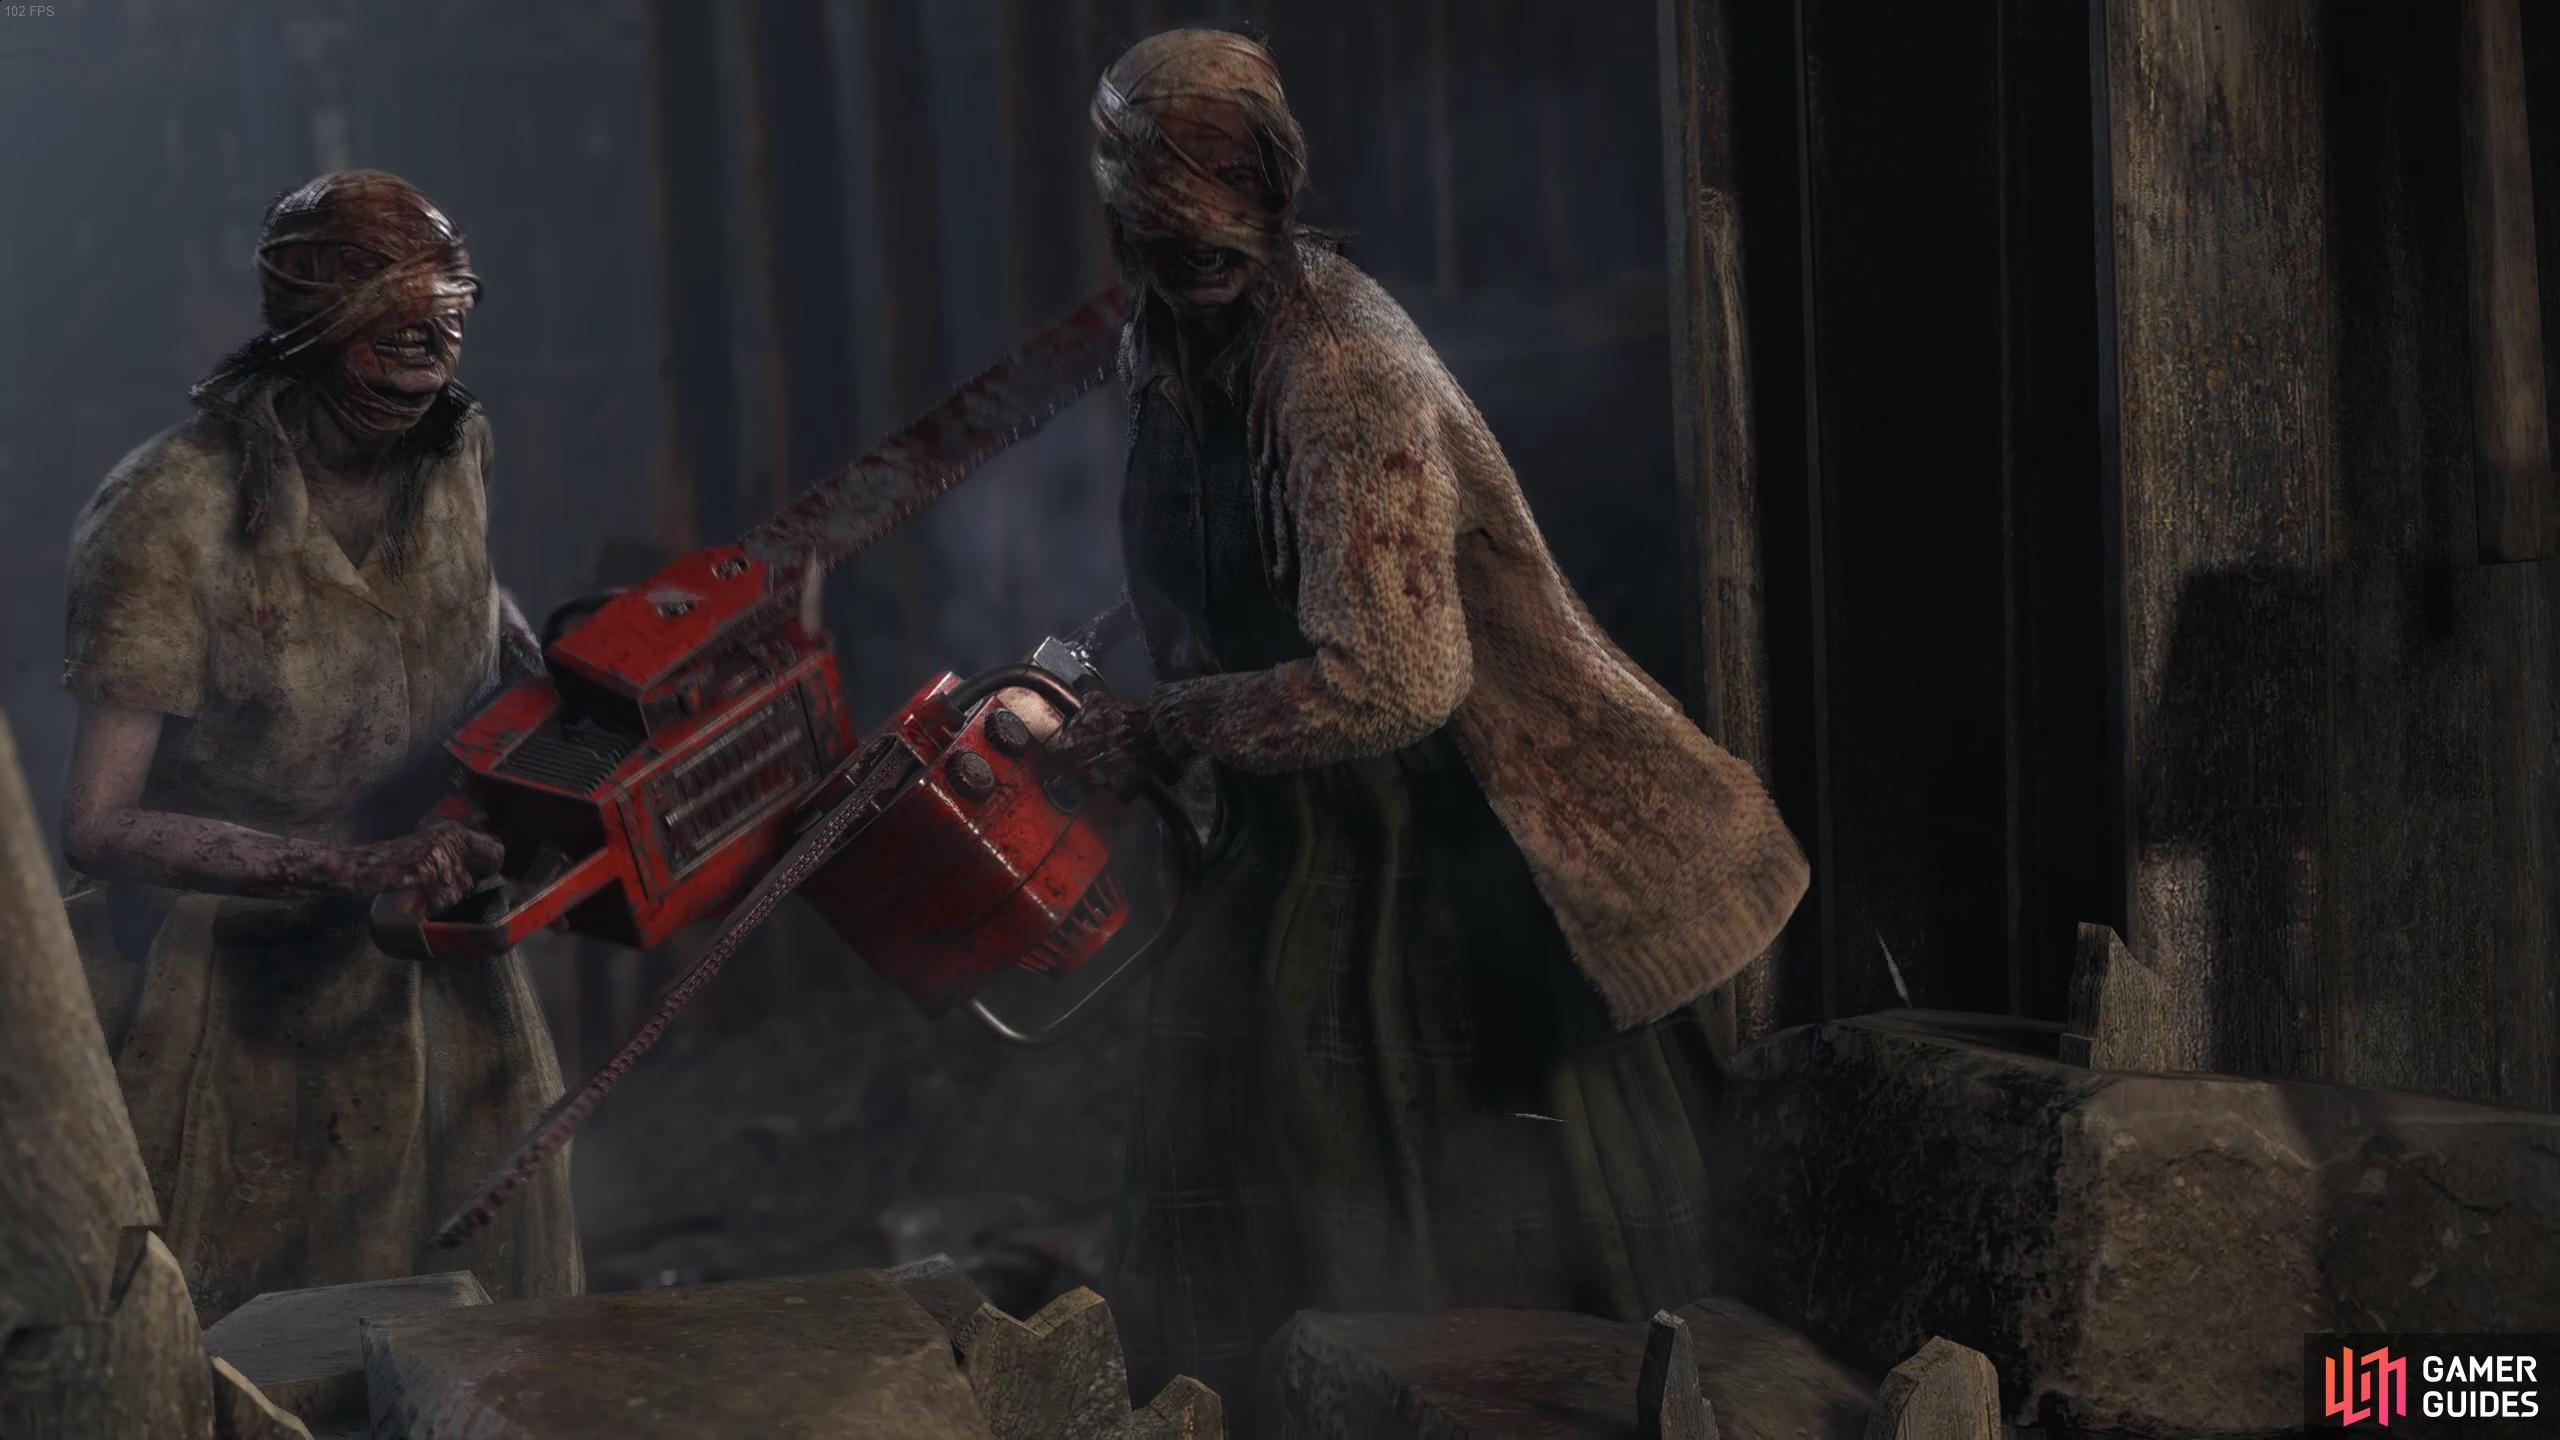 The Chainsaw Sisters, Chapter 6, Resident Evil 4 Remake.